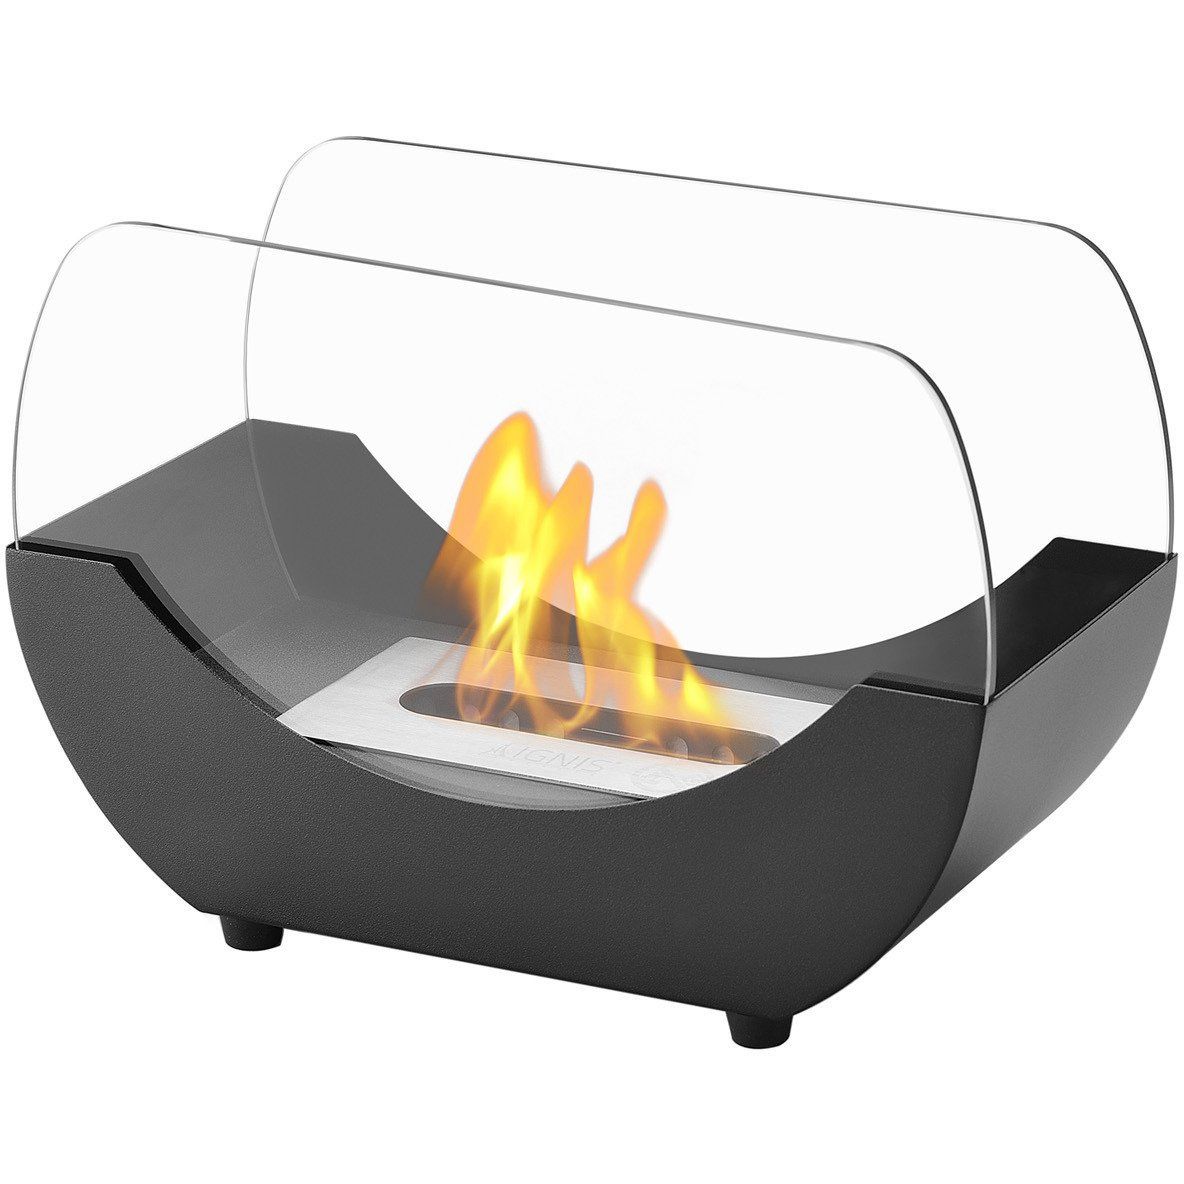 White Portable Fireplace Lovely Liberty Black Tabletop Ventless Ethanol Fireplace